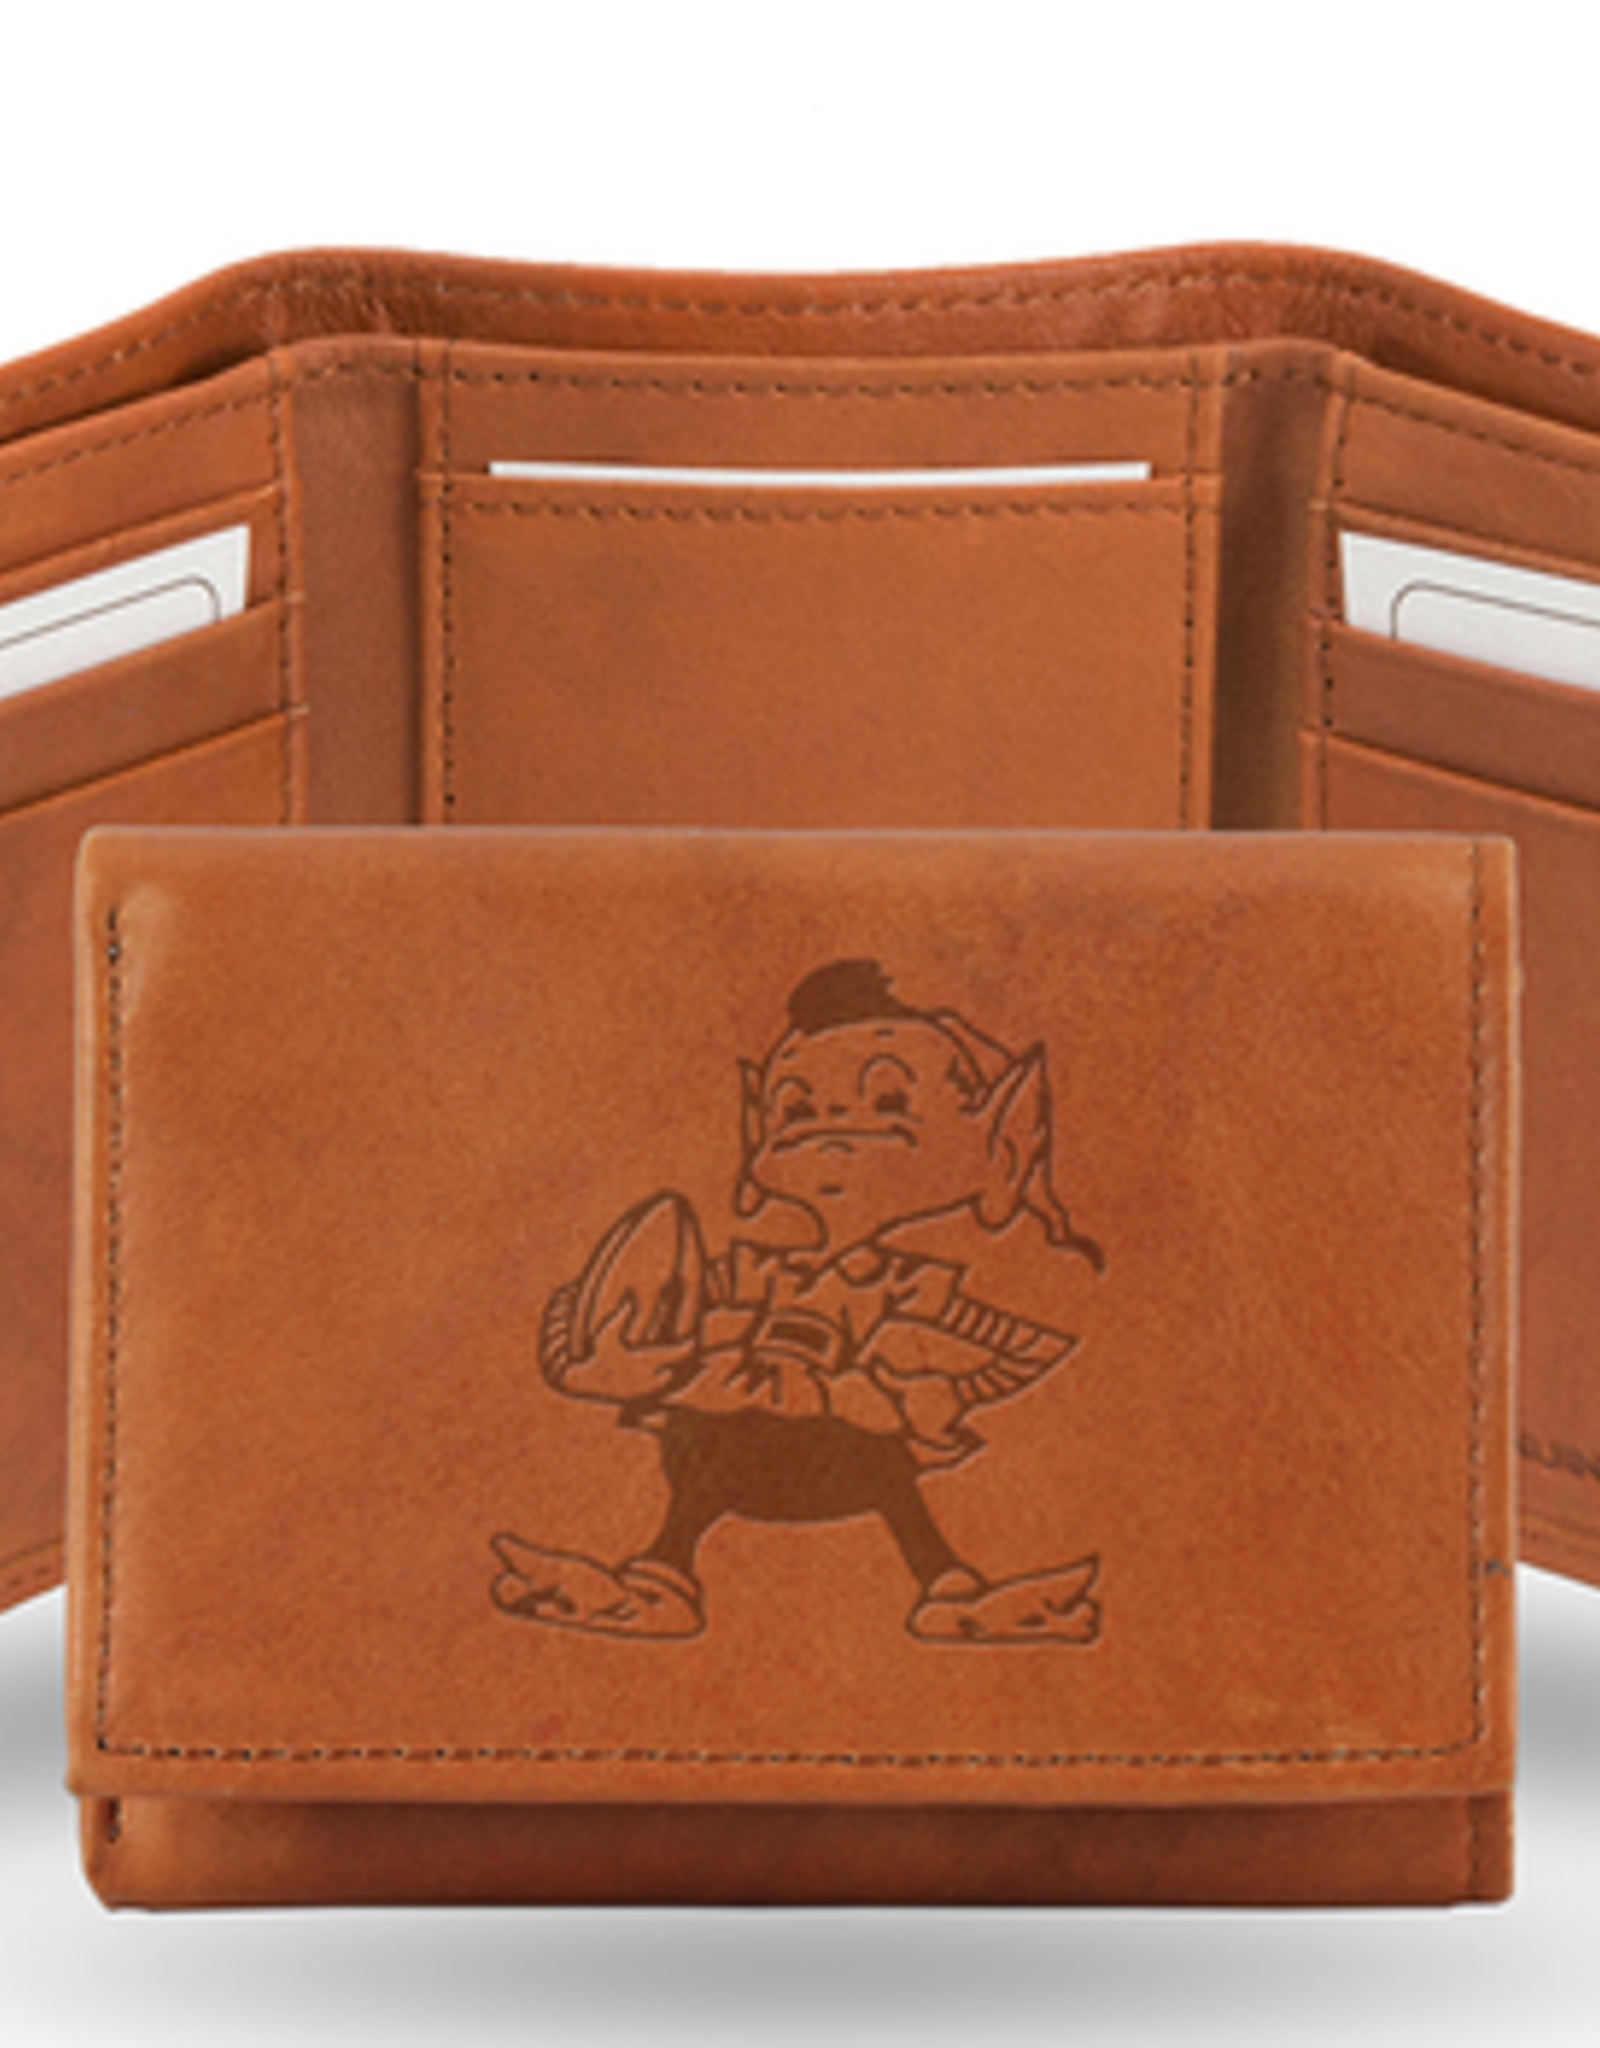 RICO INDUSTRIES Cleveland Browns Vintage Leather Trifold Wallet